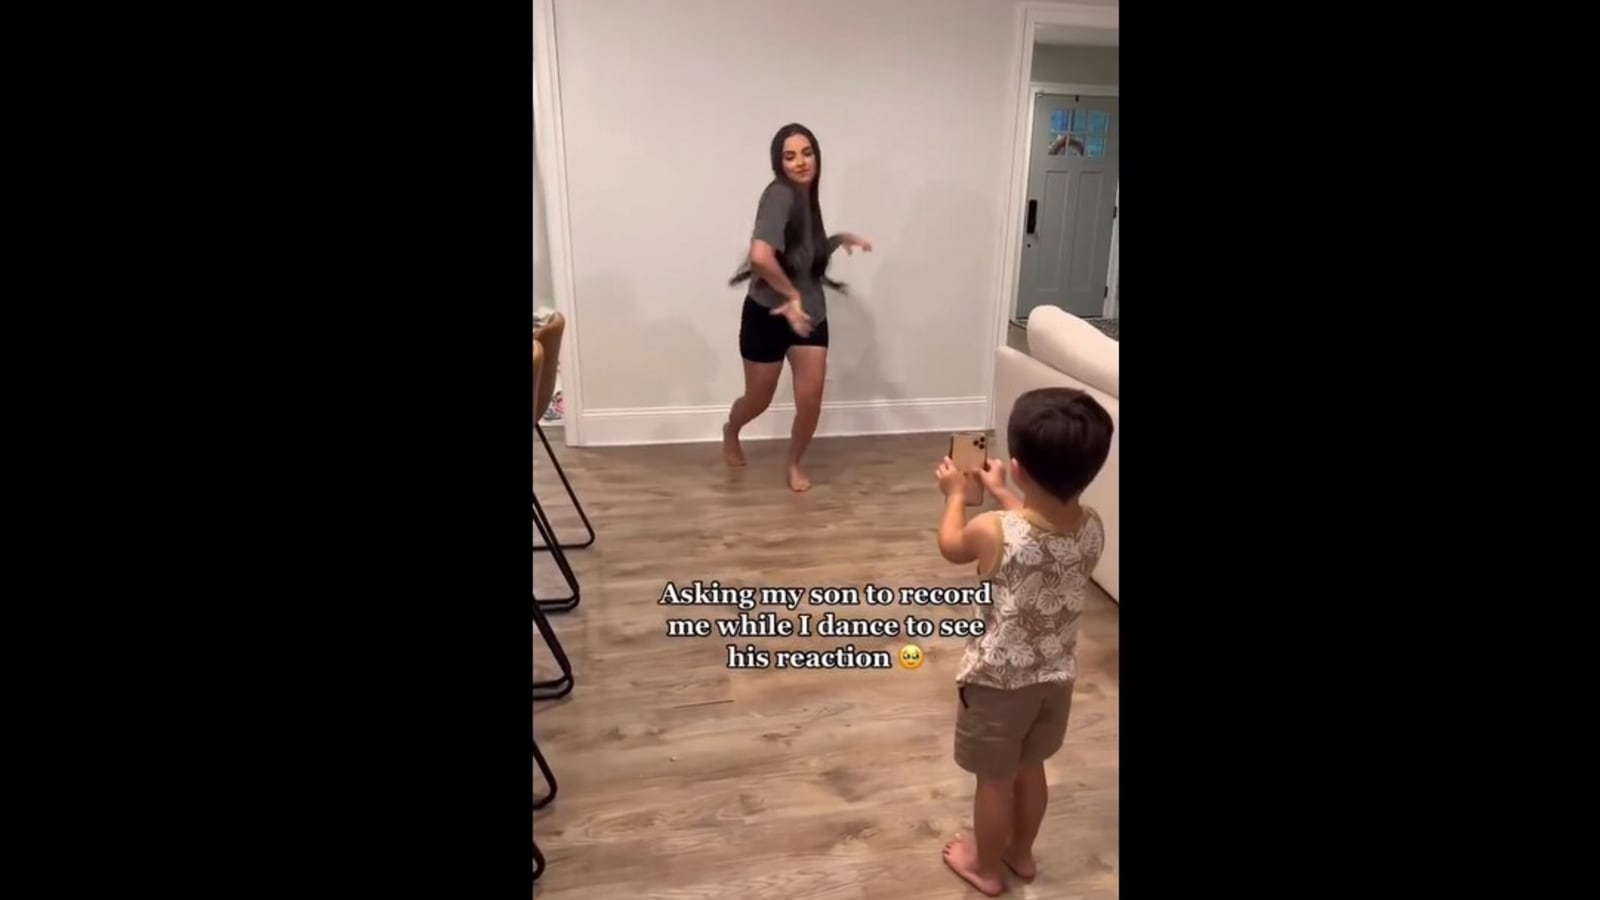 Kid thinks hes recording moms dance, she tricks him in capturing his reaction Trending